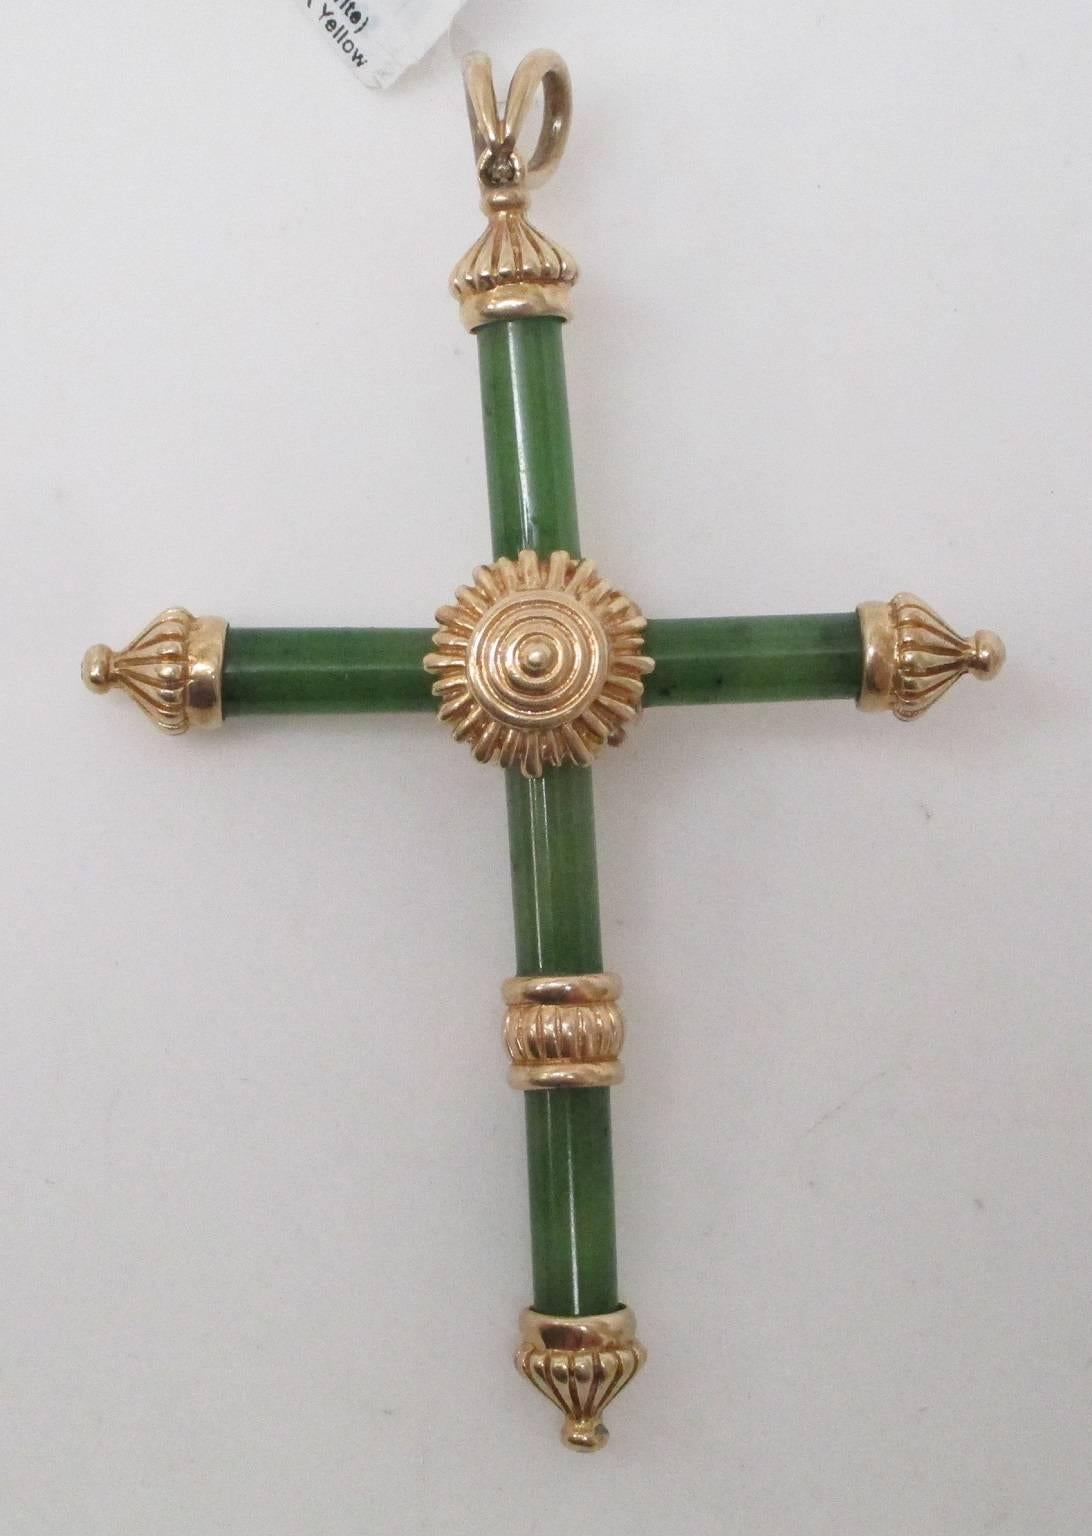 This is an exquisite Jade (Nephrite) cross, set in 14K yellow gold. It carries the sun at it's heart and will brighten the day of the wearer. This is not a cross you will see everywhere. 

St. John and Myers Jewelry is the only jeweler in Central